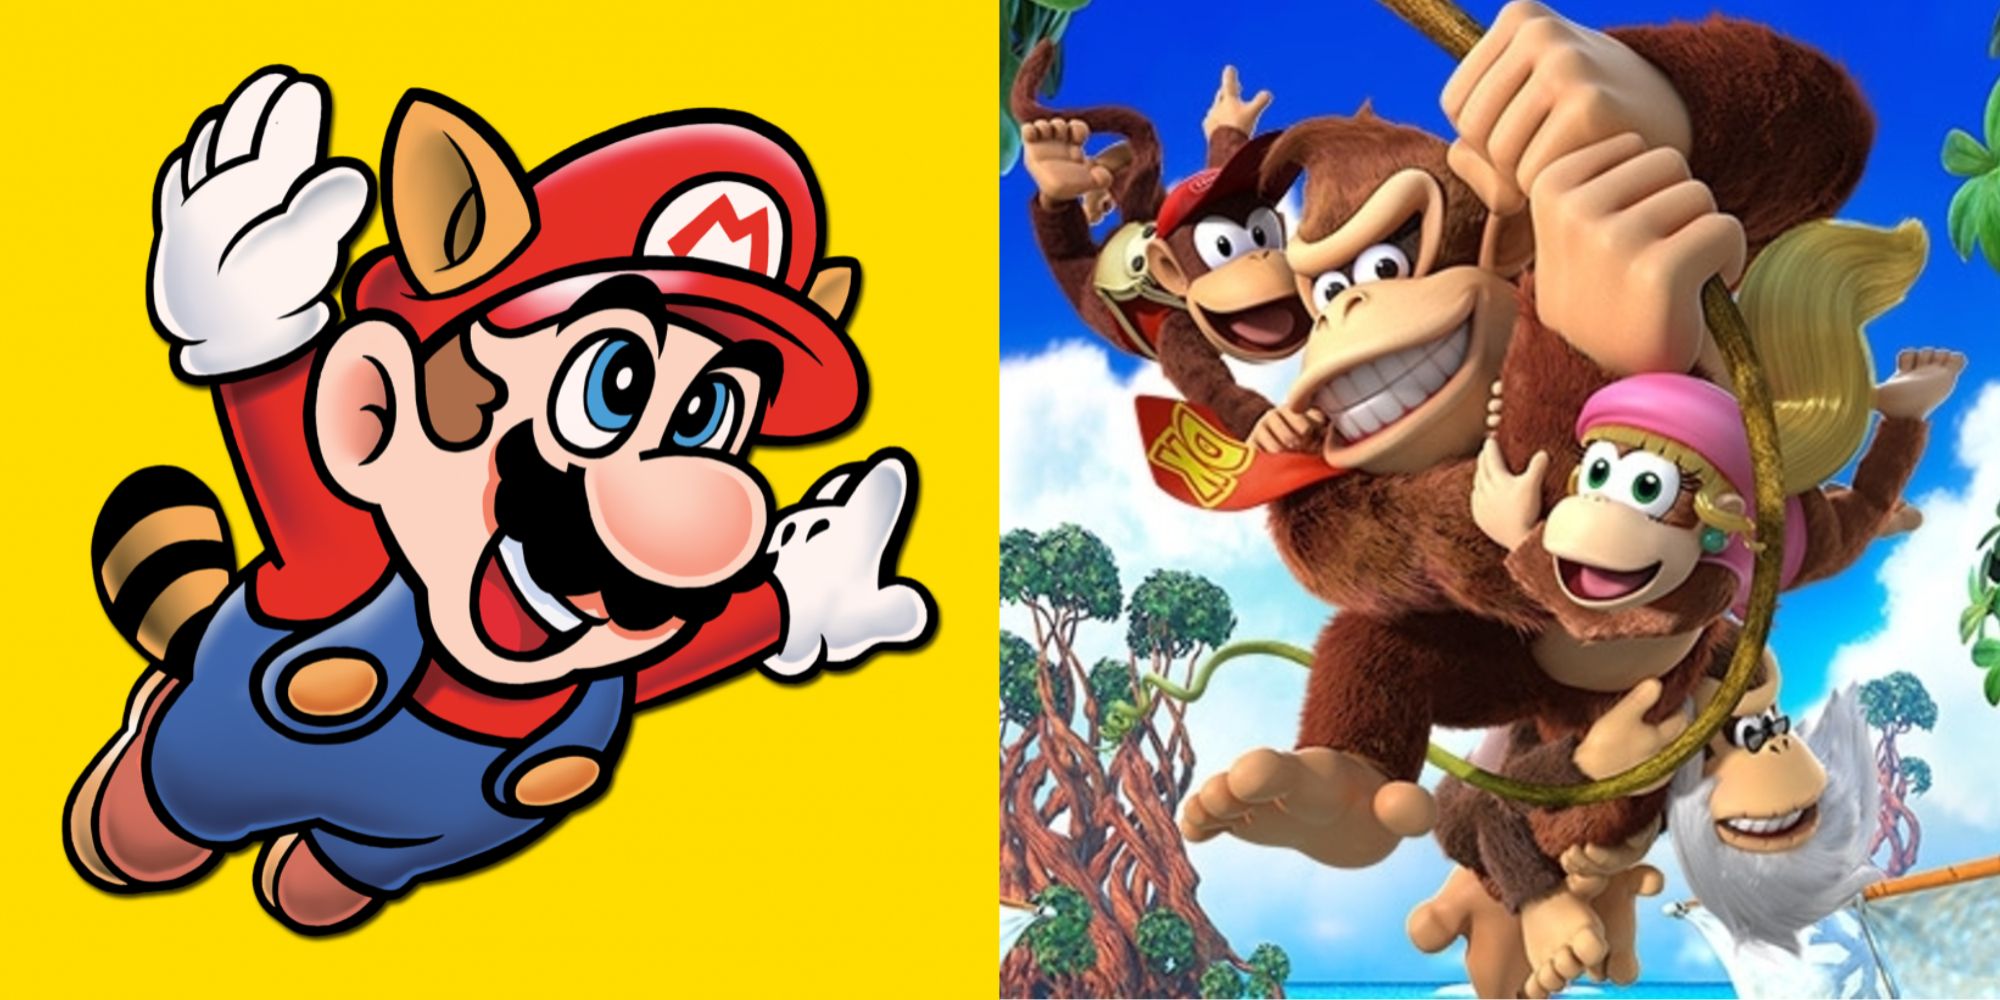 Split image of stills from Super Mario Bros 3 and Donkey Kong Country Tropical Freeze